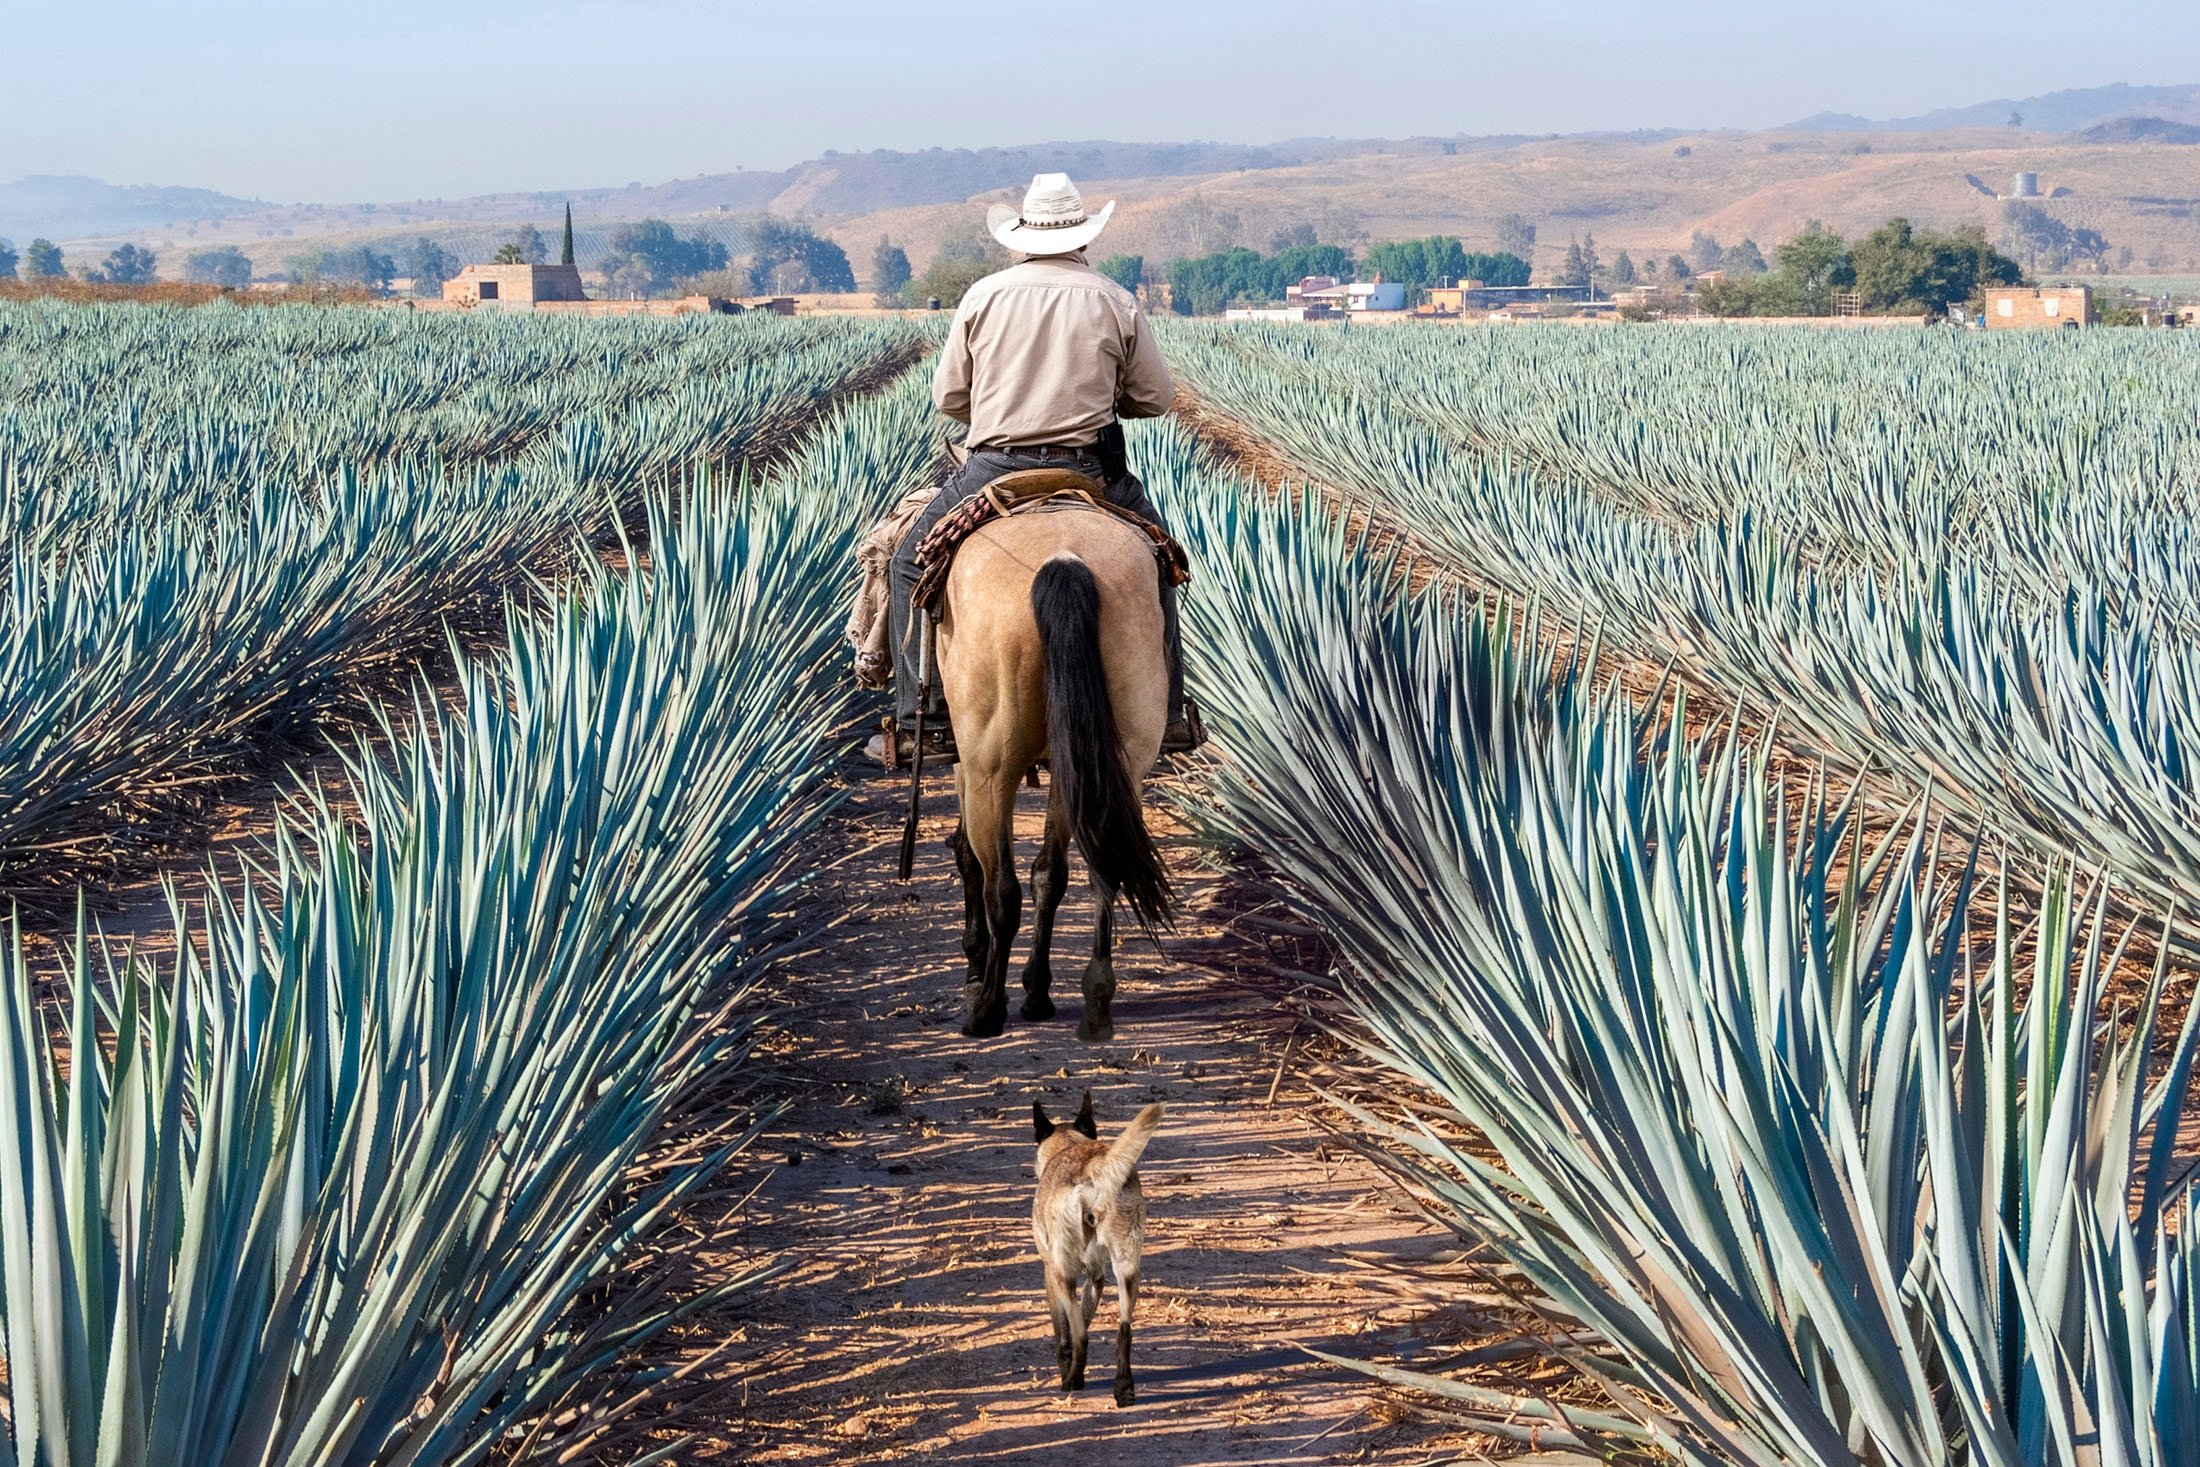 A farmer on his horse walks through agave tequila landscape, in Jalisco, Mexico. (Shutterstock Photo)